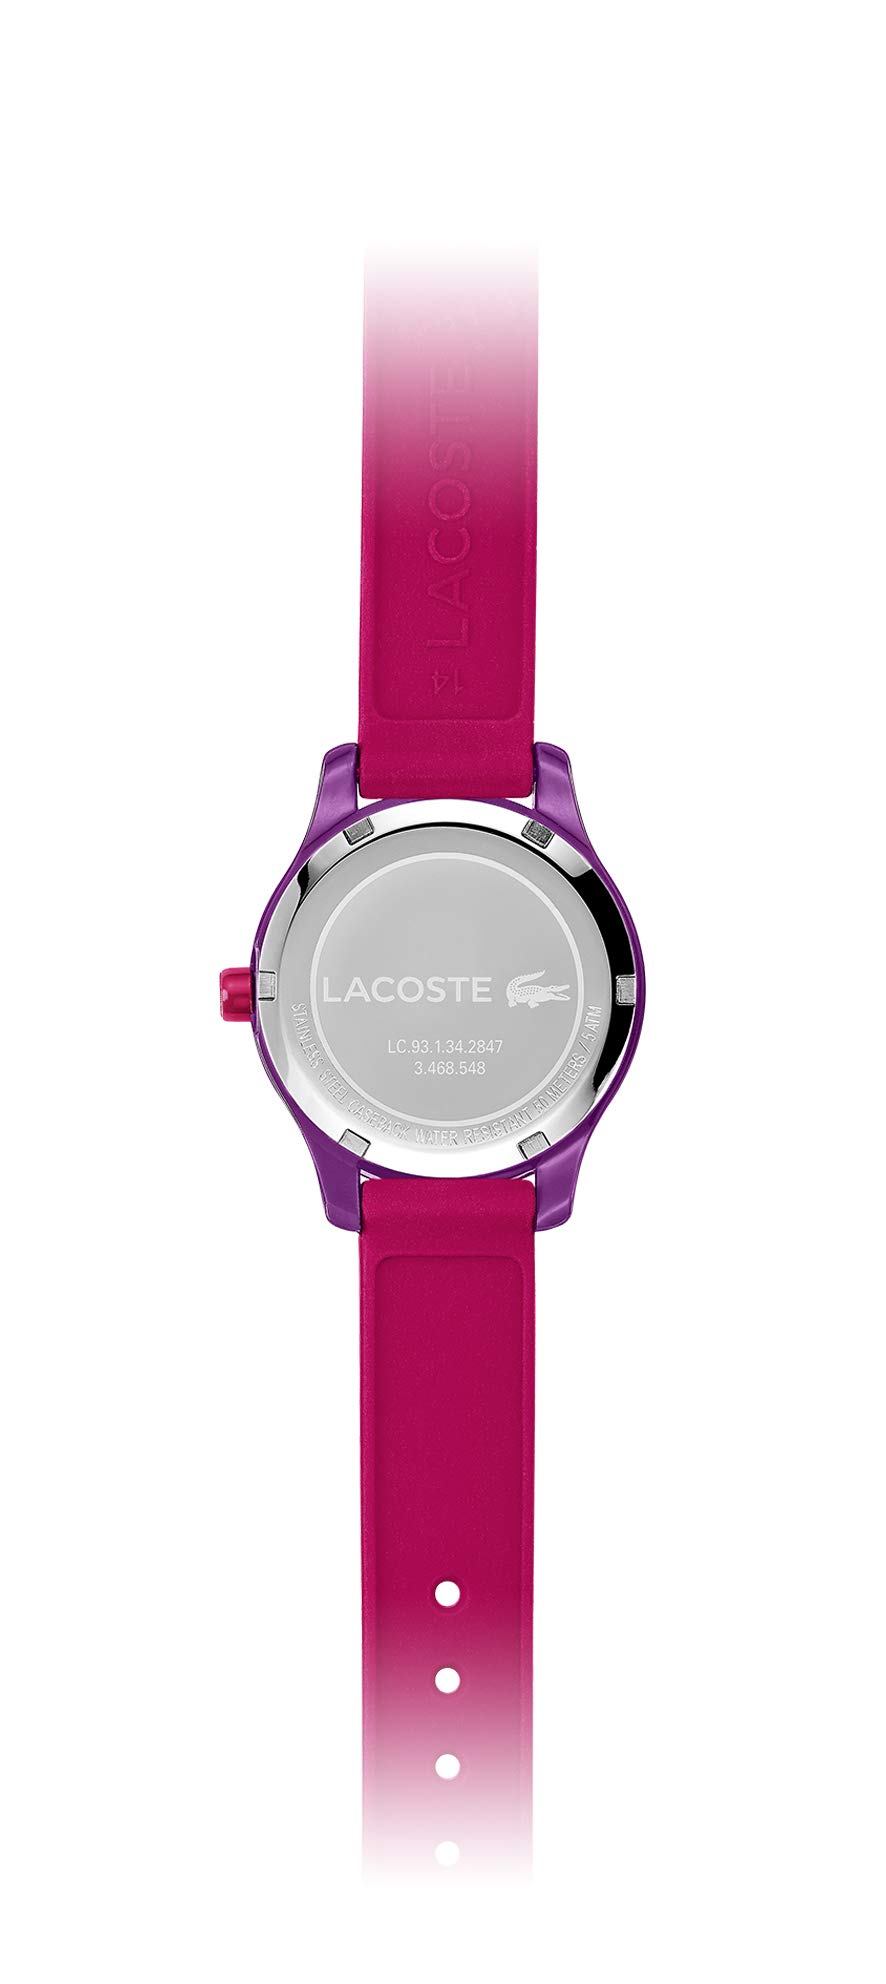 Lacoste Kids 12.Quartz Tr-90 and Rubber Strap Casual Watch, Pink, Unisex, 2030012